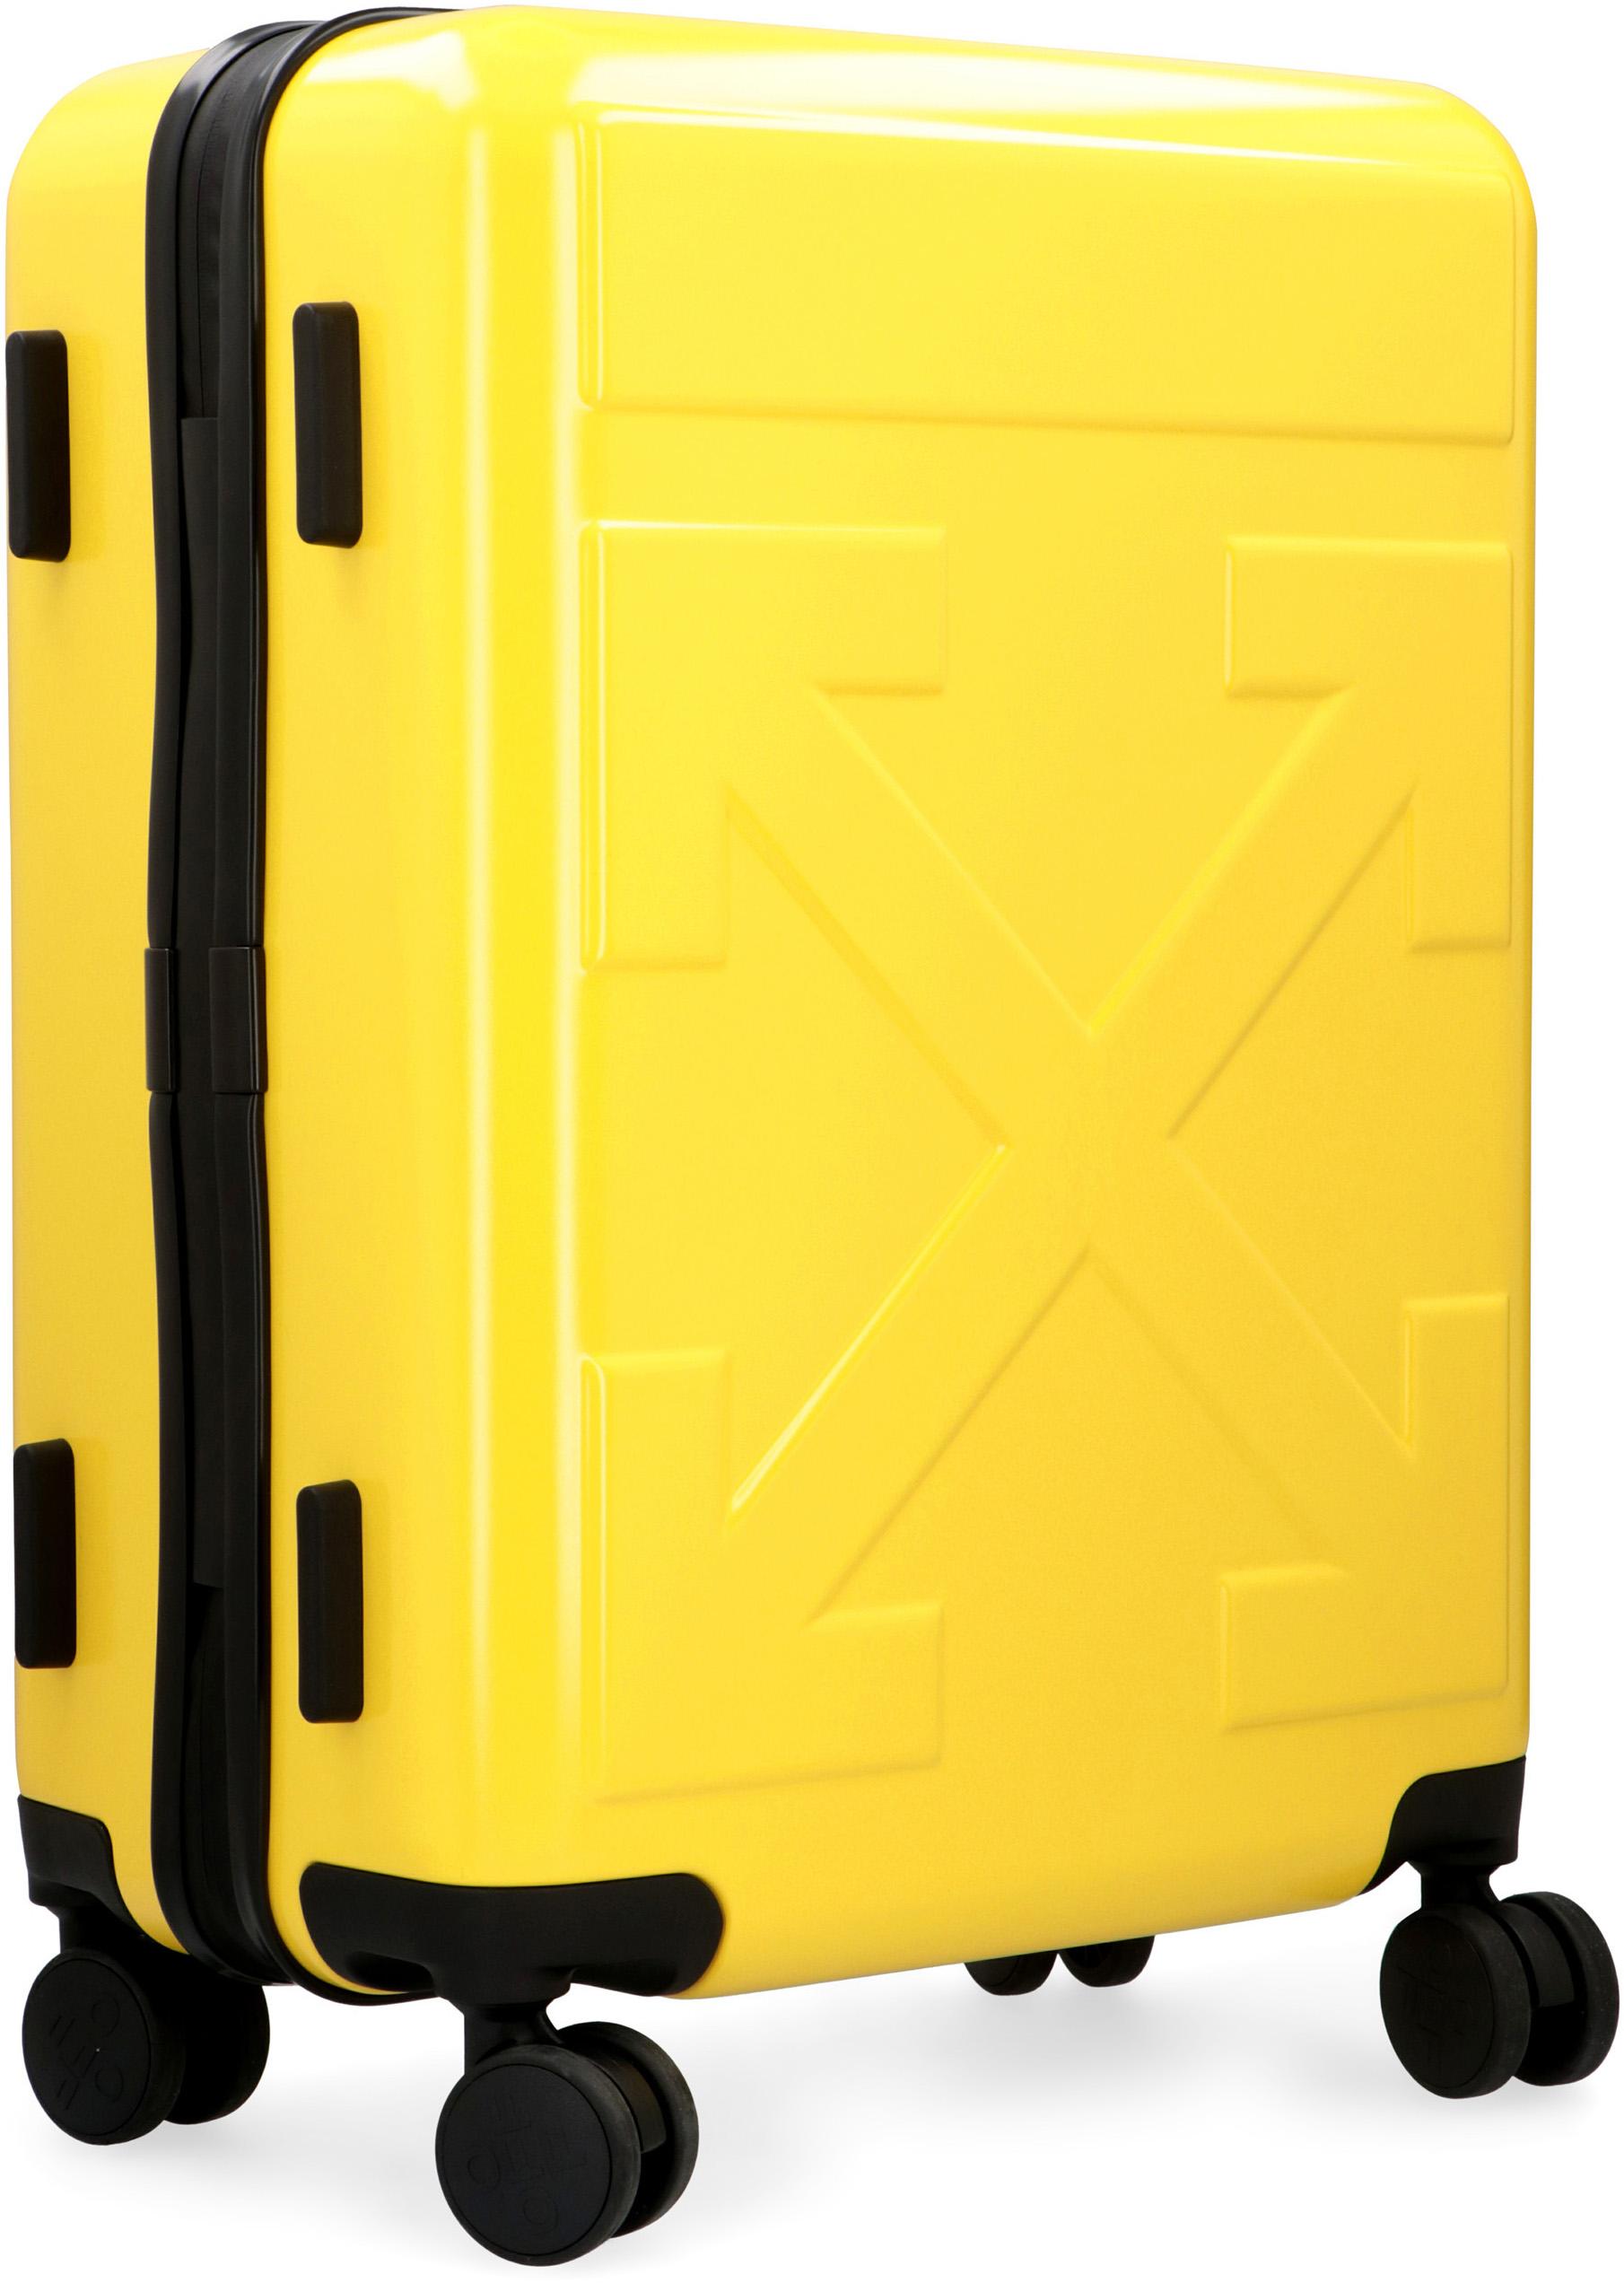 Off-White c/o Virgil Abloh Yellow Arrows Trolley Carry-on Suitcase 